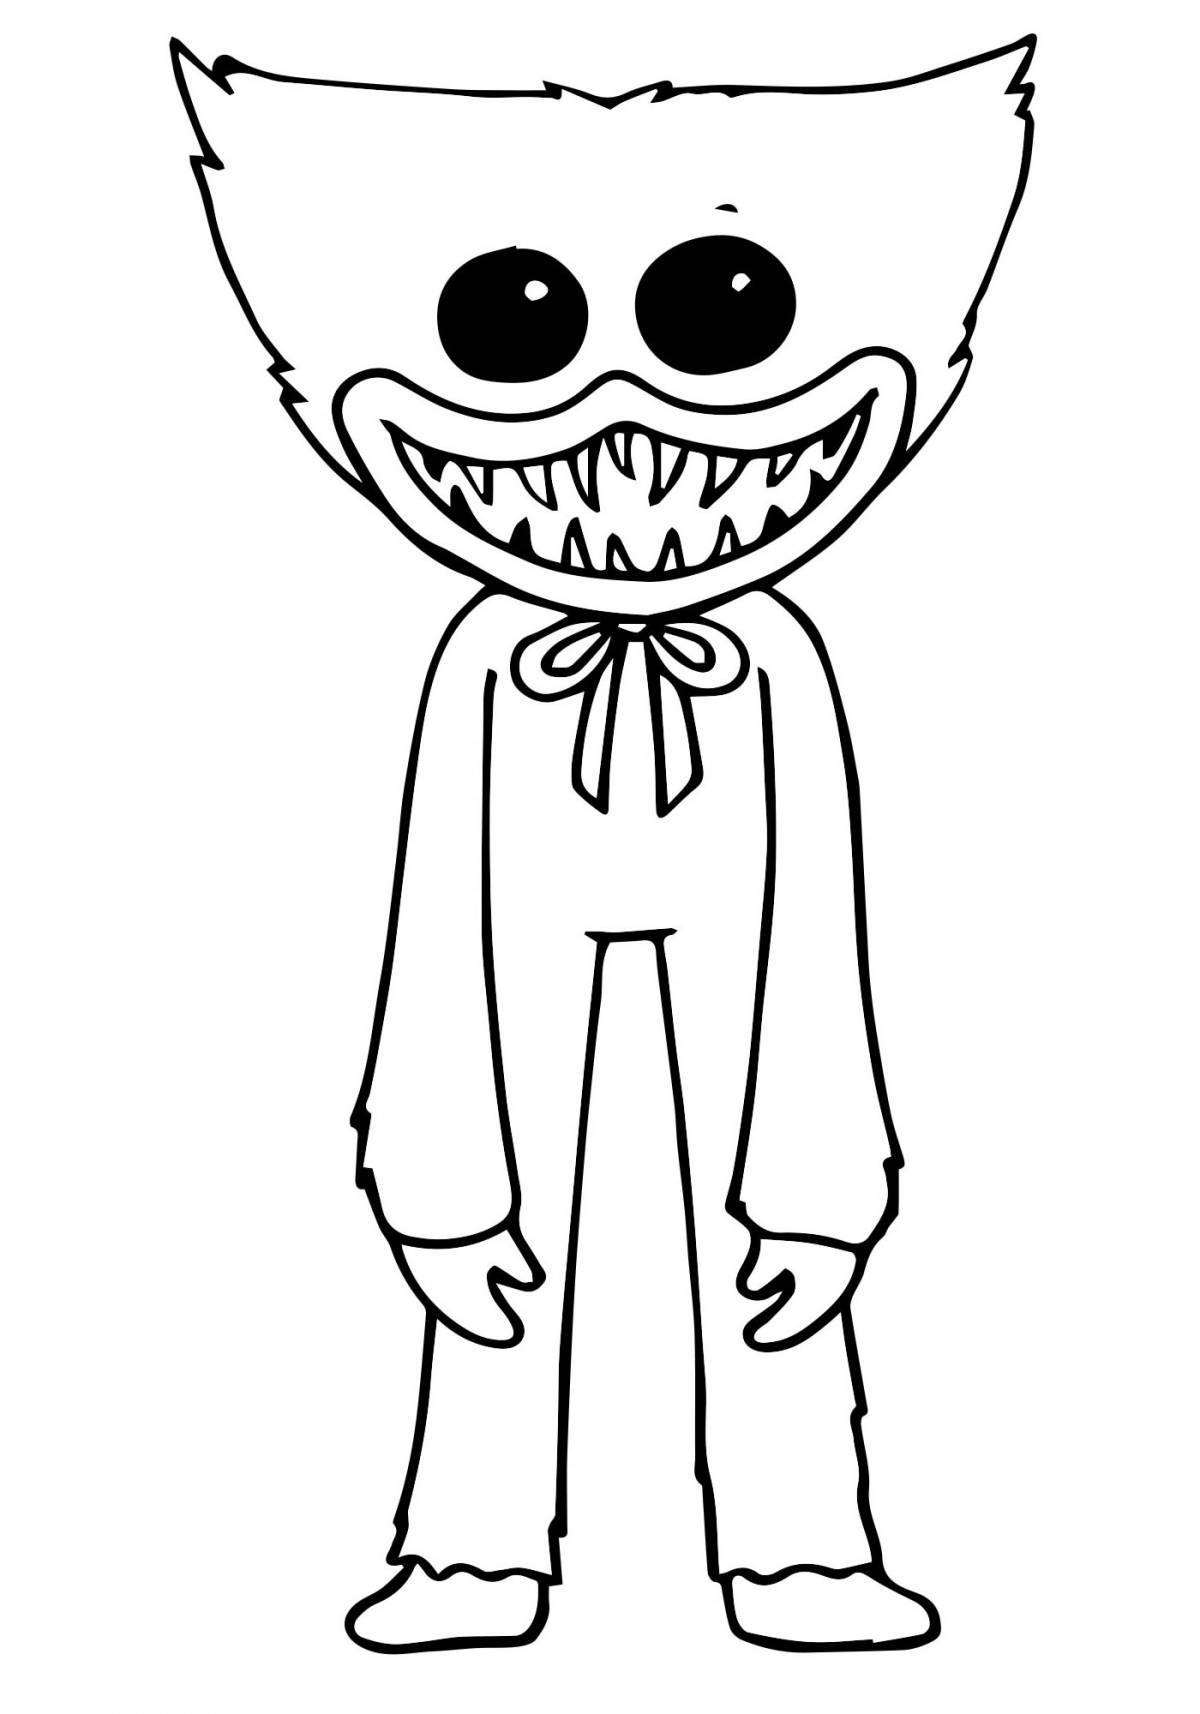 Luminous haggy waggie coloring page